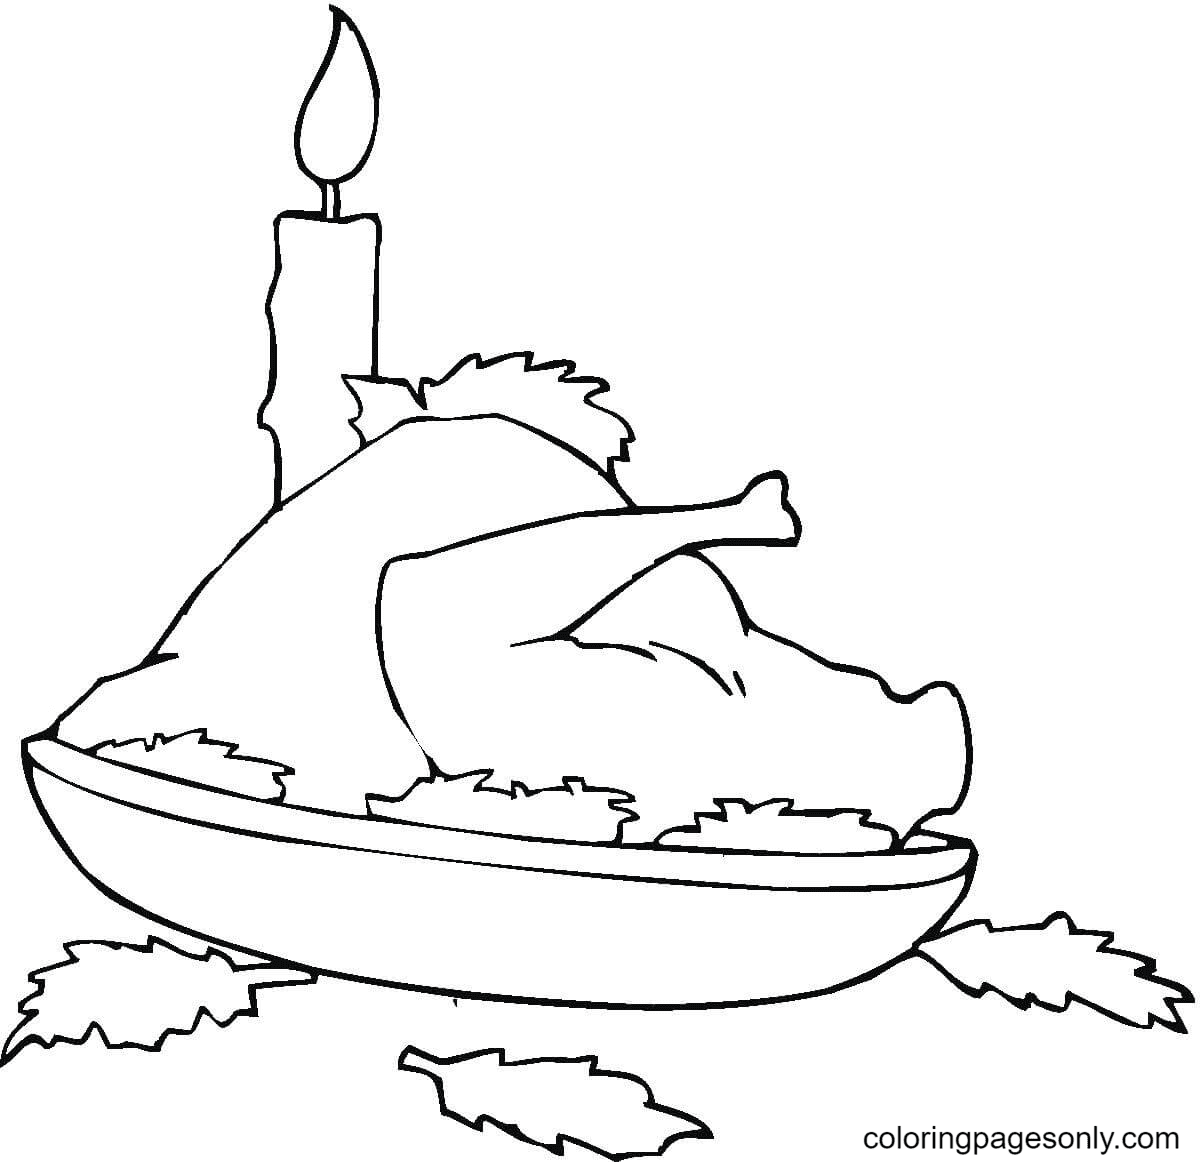 Turkey Dinner Coloring Pages